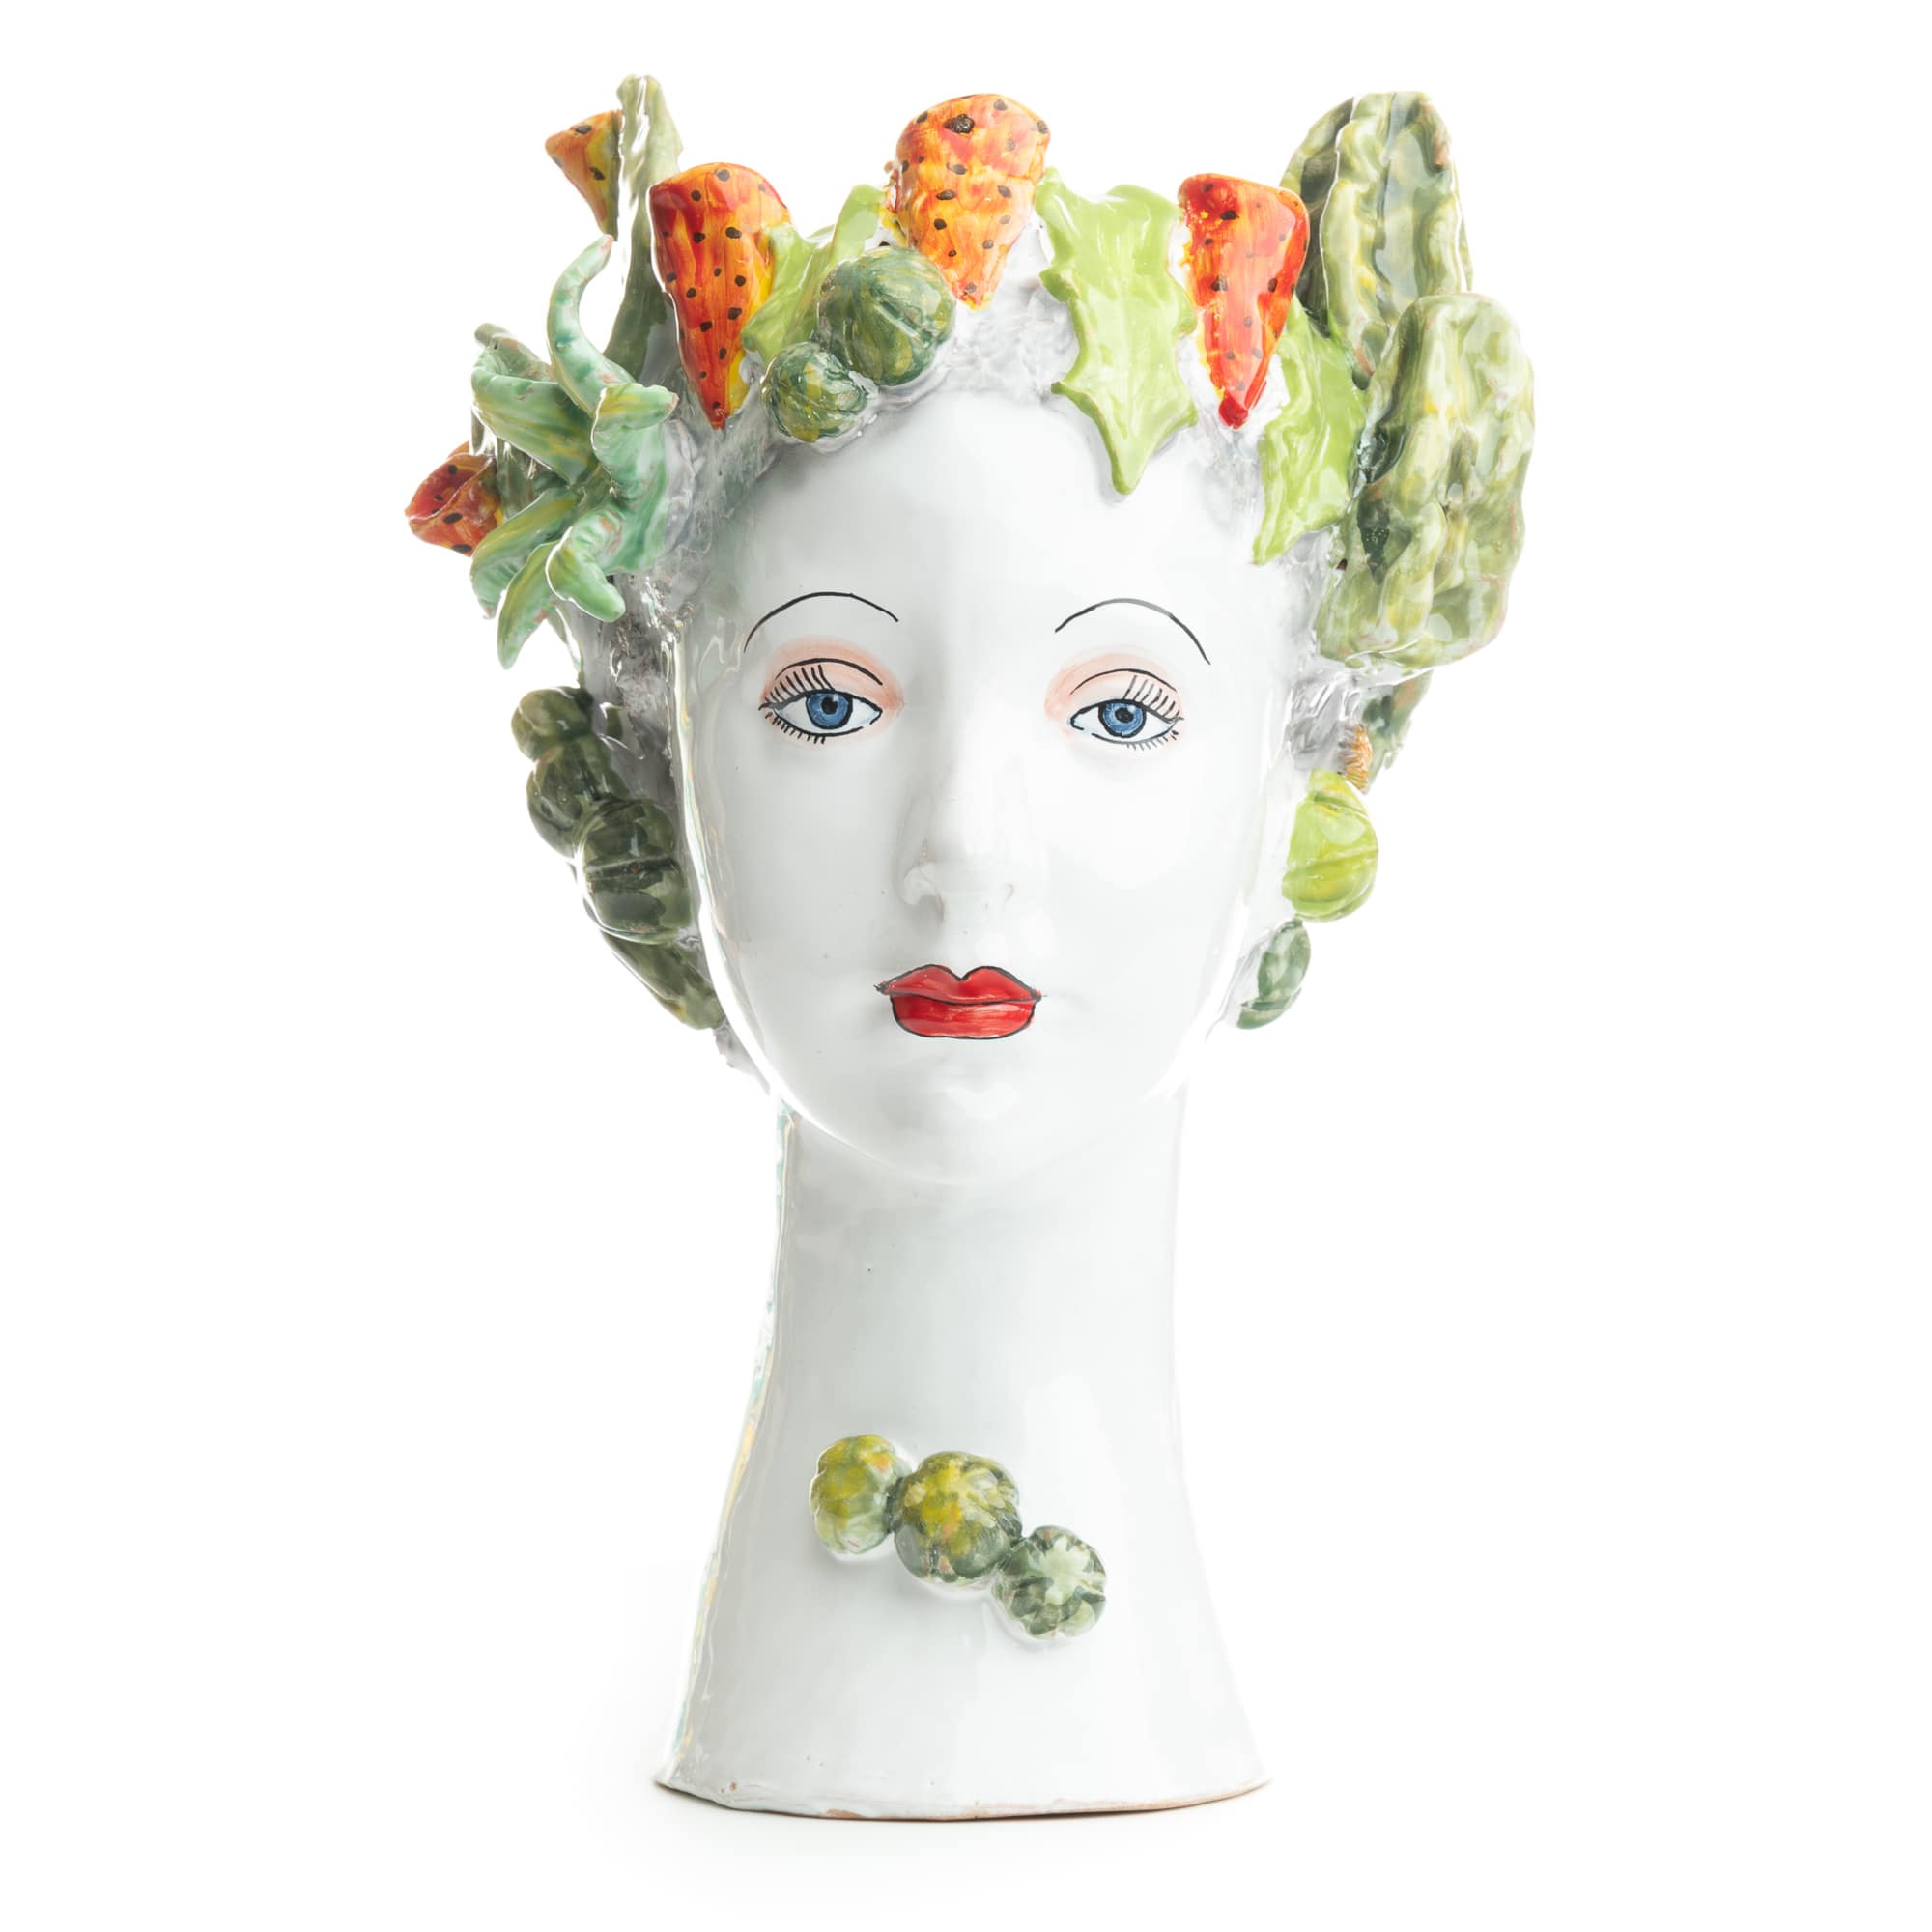 Ceramiche D'arte Dolfi Sculpture with Succulents, ceramics, pottery, italian design, majolica, handmade, handcrafted, handpainted, home decor, kitchen art, home goods, deruta, majolica, Artisan, treasures, traditional art, modern art, gift ideas, style, SF, shop small business, artists, shop online, landmark store, legacy, one of a kind, limited edition, gift guide, gift shop, retail shop, decorations, shopping, italy, home staging, home decorating, home interiors